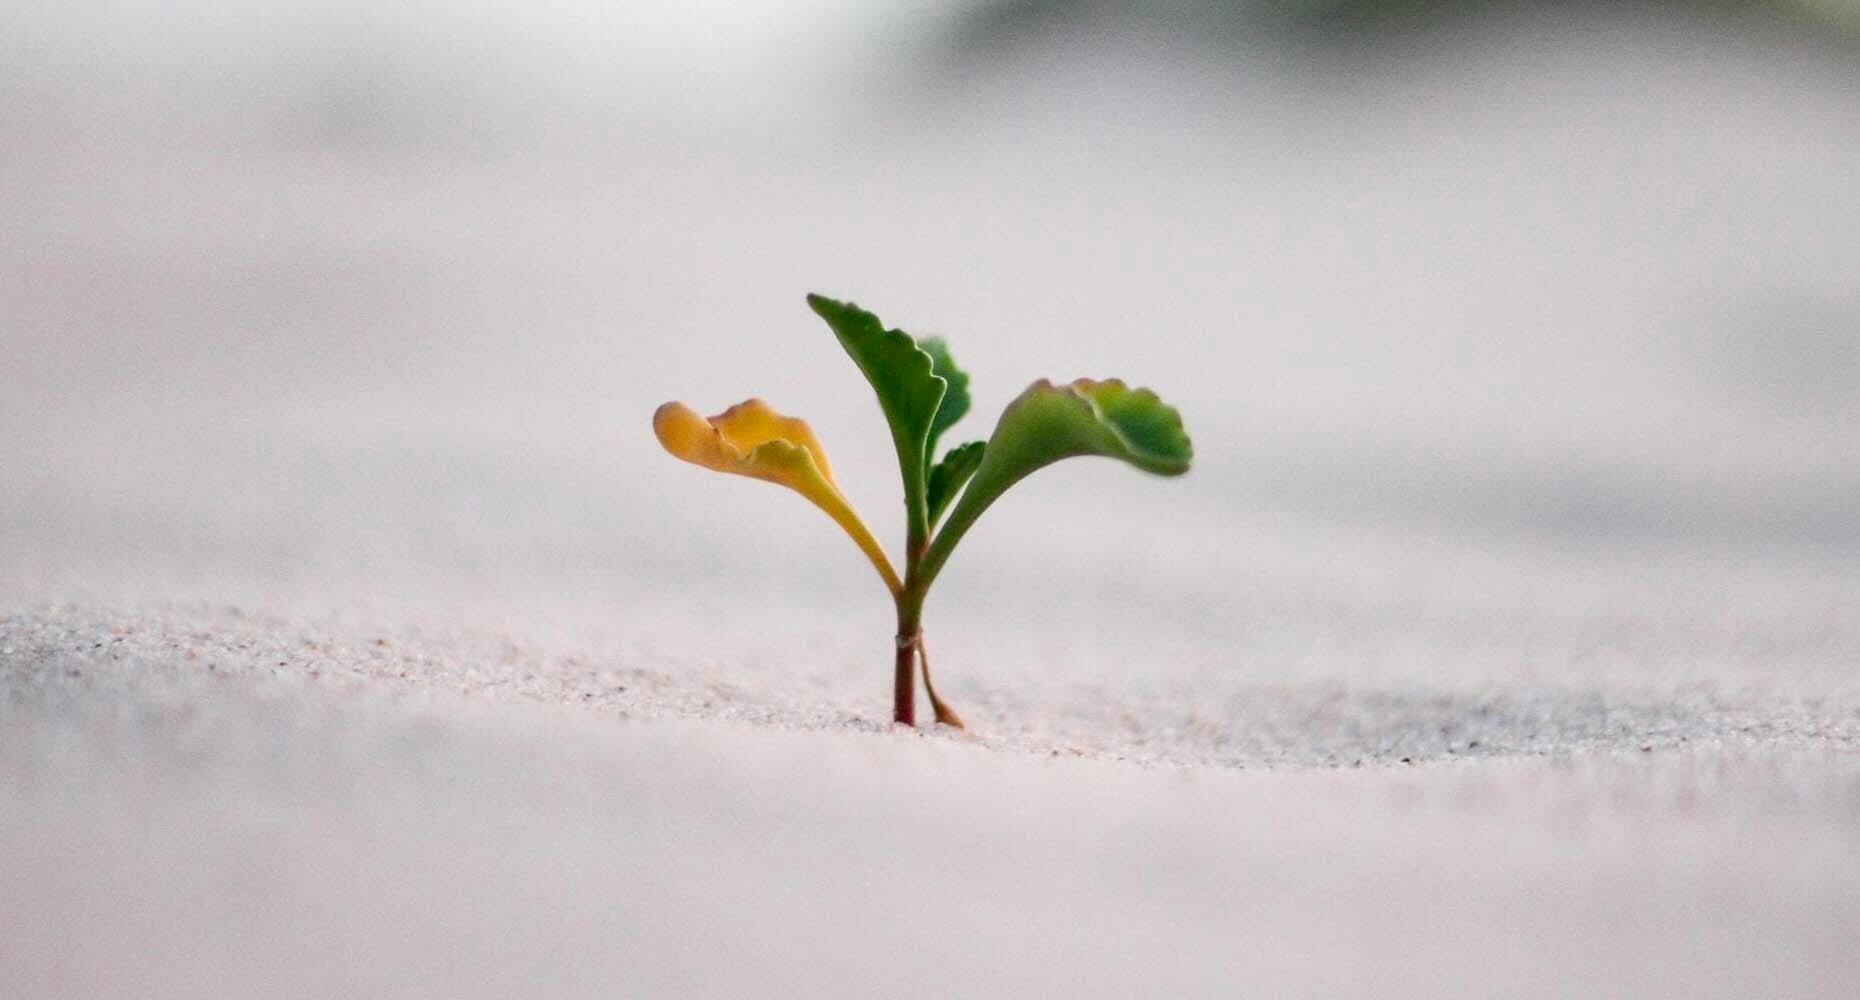 An image of a sprouting plant, emerging from soil, symbolizing growth, renewal, and vitality, evoking concepts of sustainability and progress.